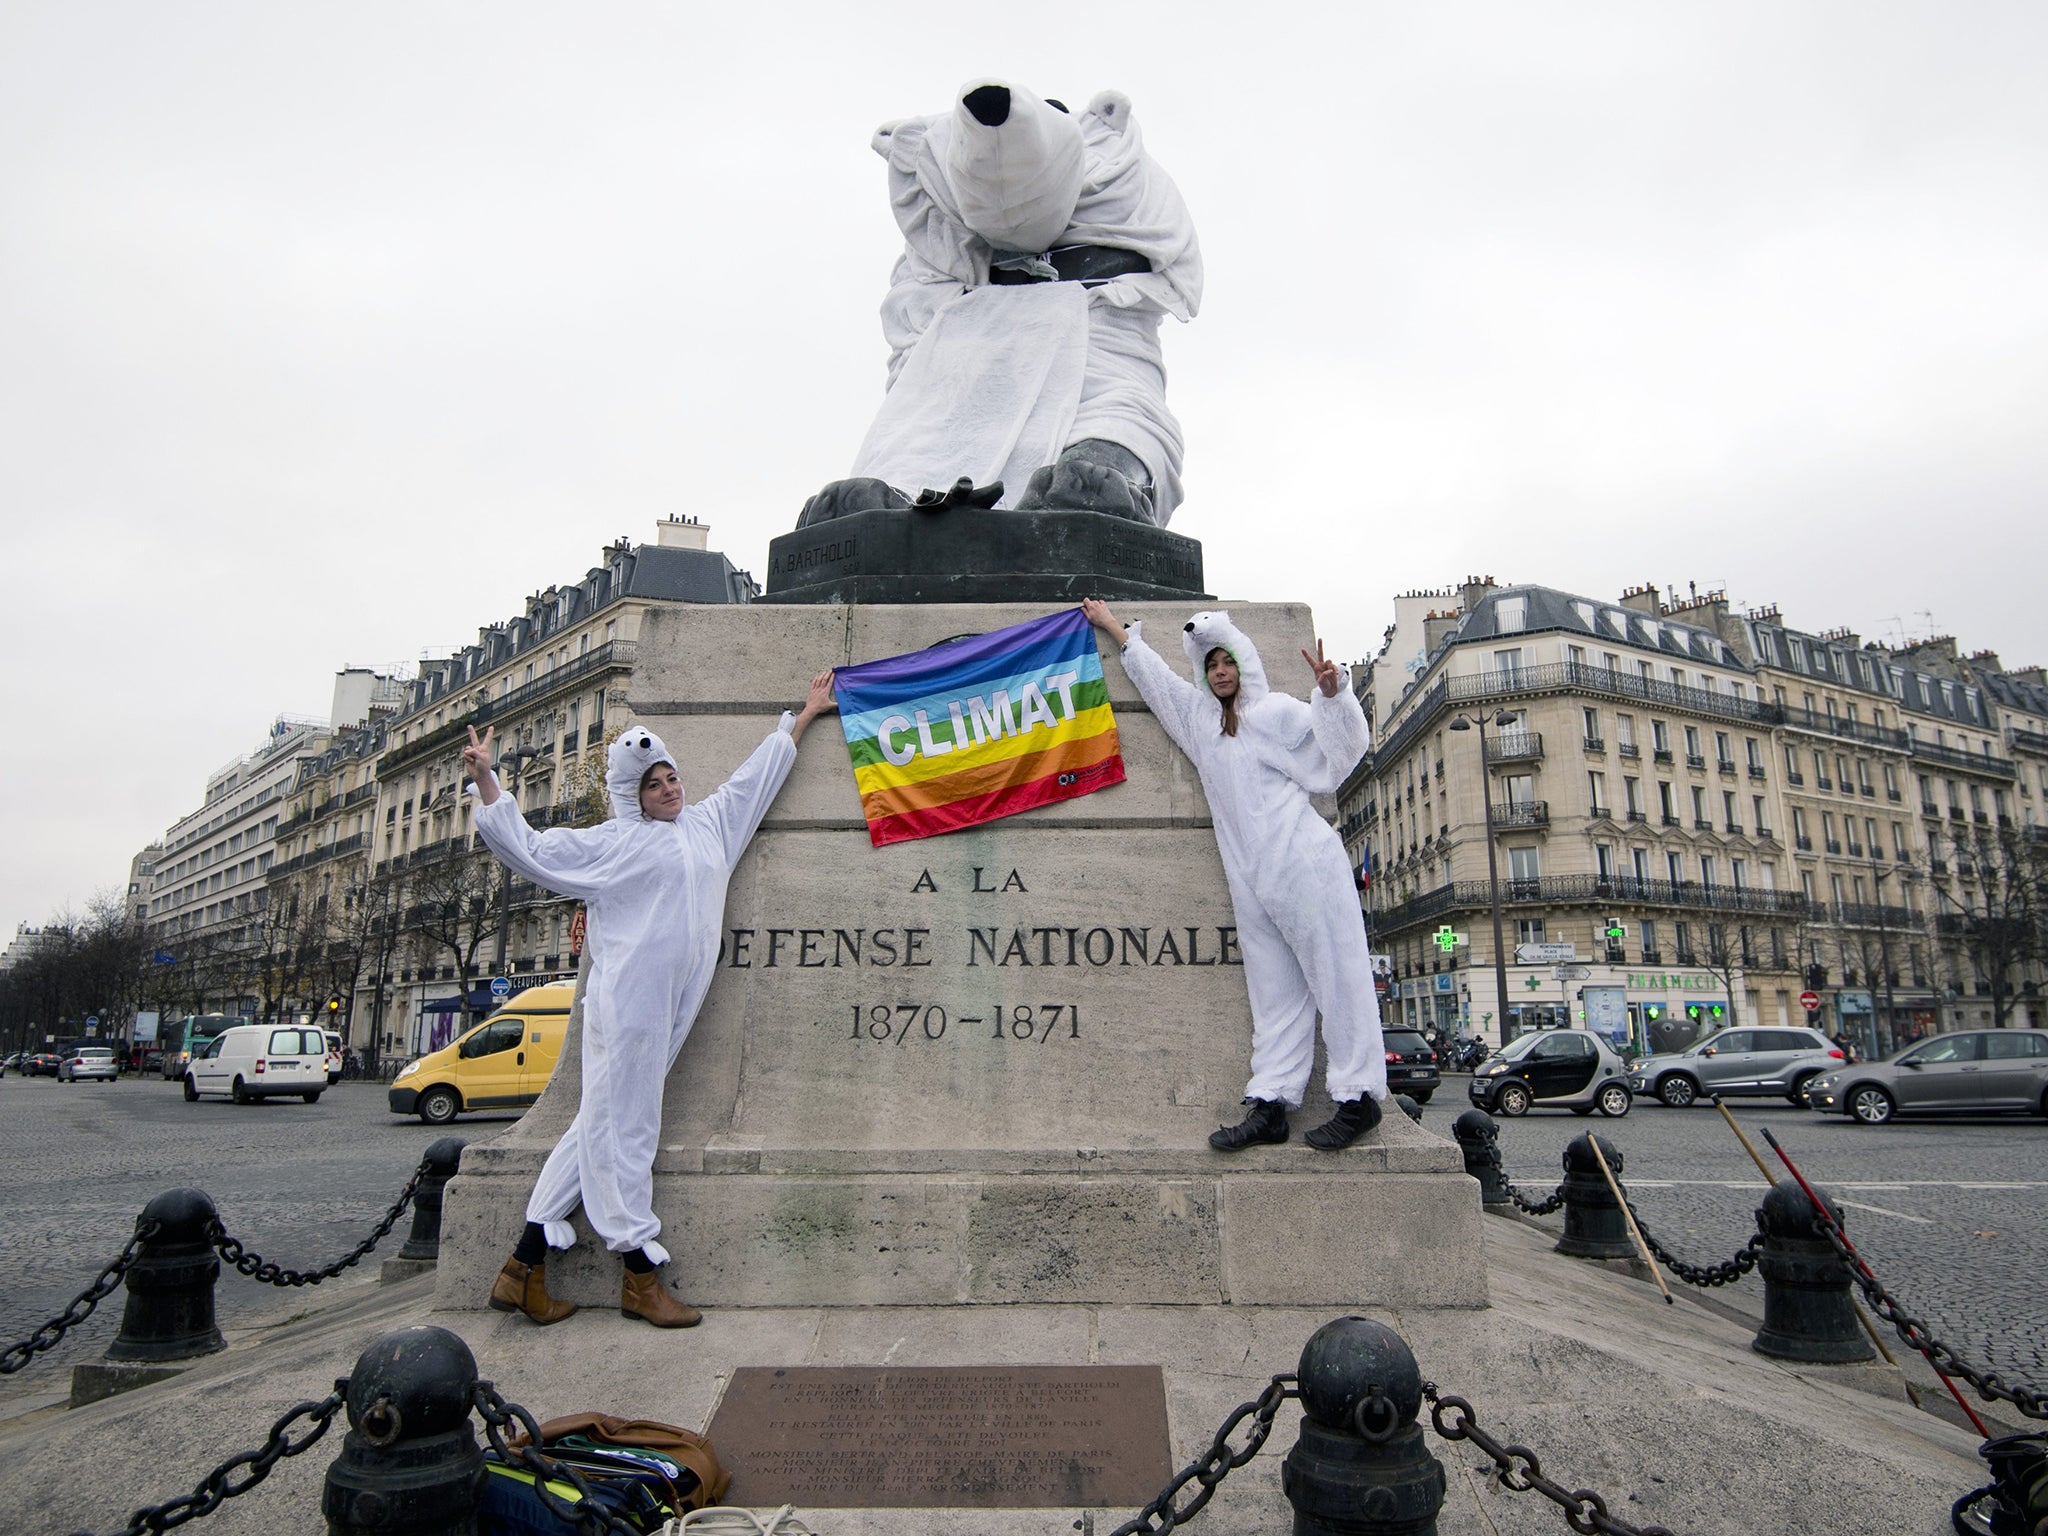 Two women dressed as polar bear hold a peace flag with an inscription reading "Climat" as the gestures a victory sign in front of the "Lion of Belfort" statue, also dressed as a polar bear, on the Denfert-Rochereau place in Paris.